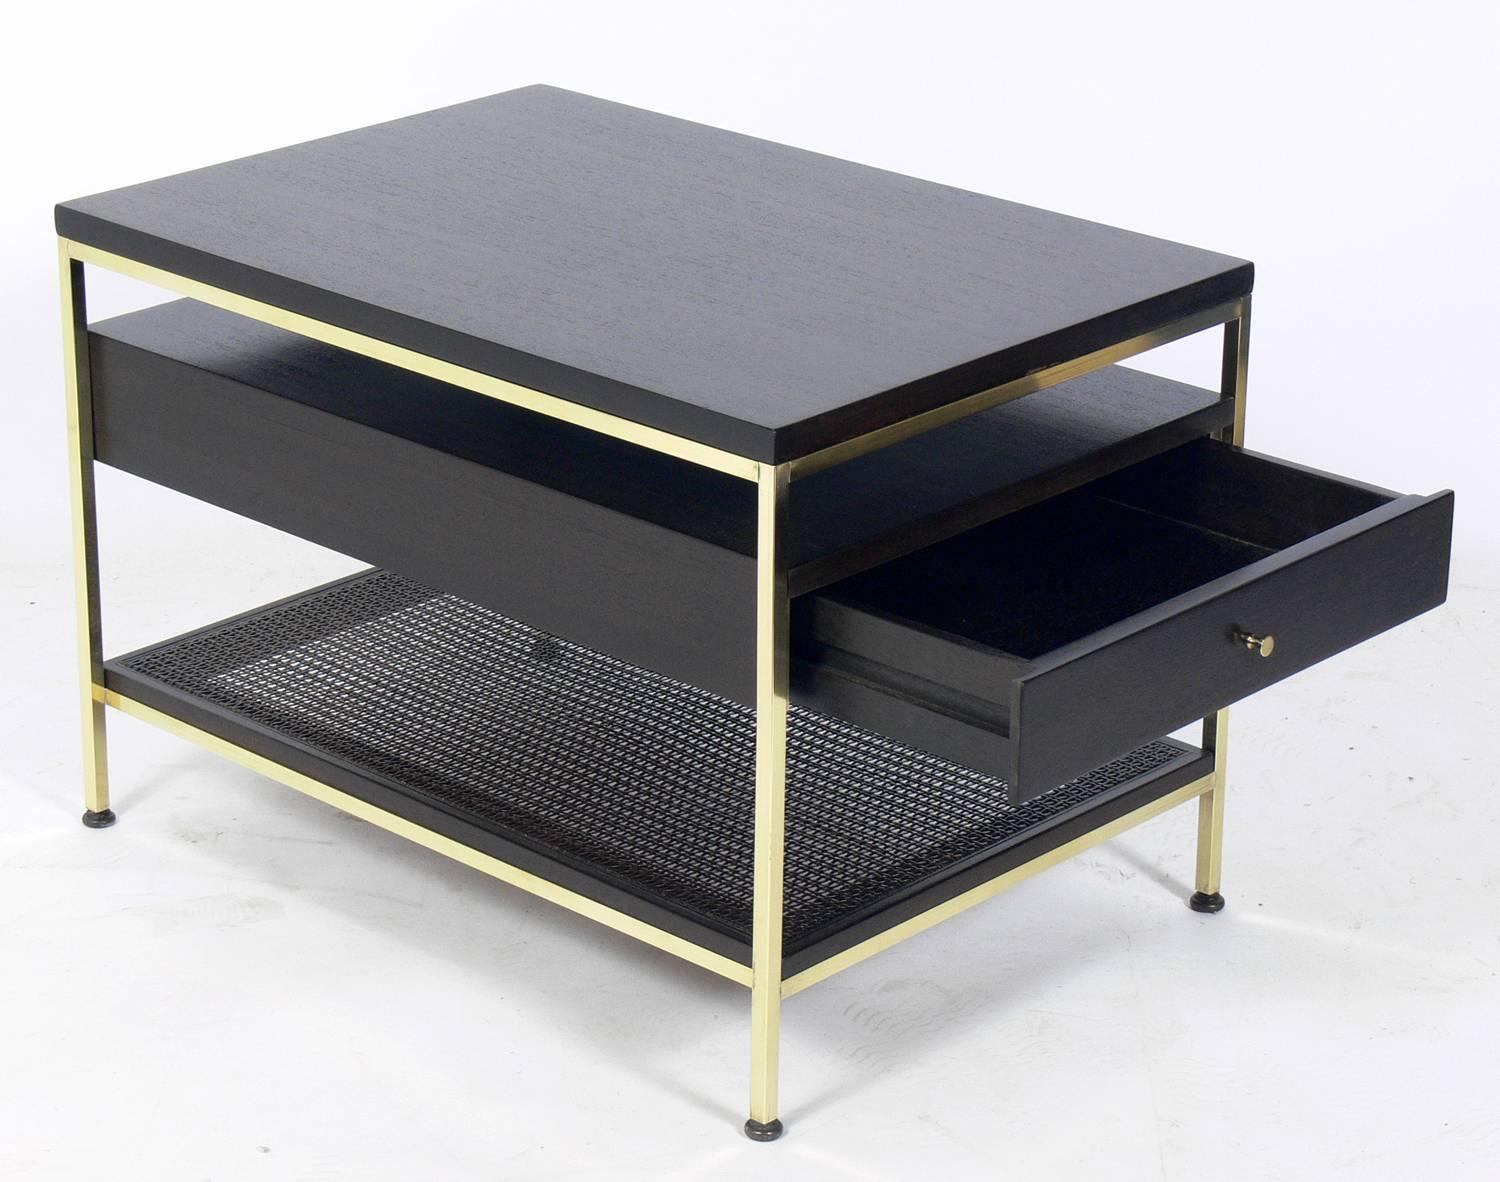 Modernist nightstand or side table, designed by Paul McCobb for Calvin, circa 1950s. This piece is a versatile size and can be used as a nightstand or side table. It has been completely restored in an ultra-deep brown color lacquer finish and the